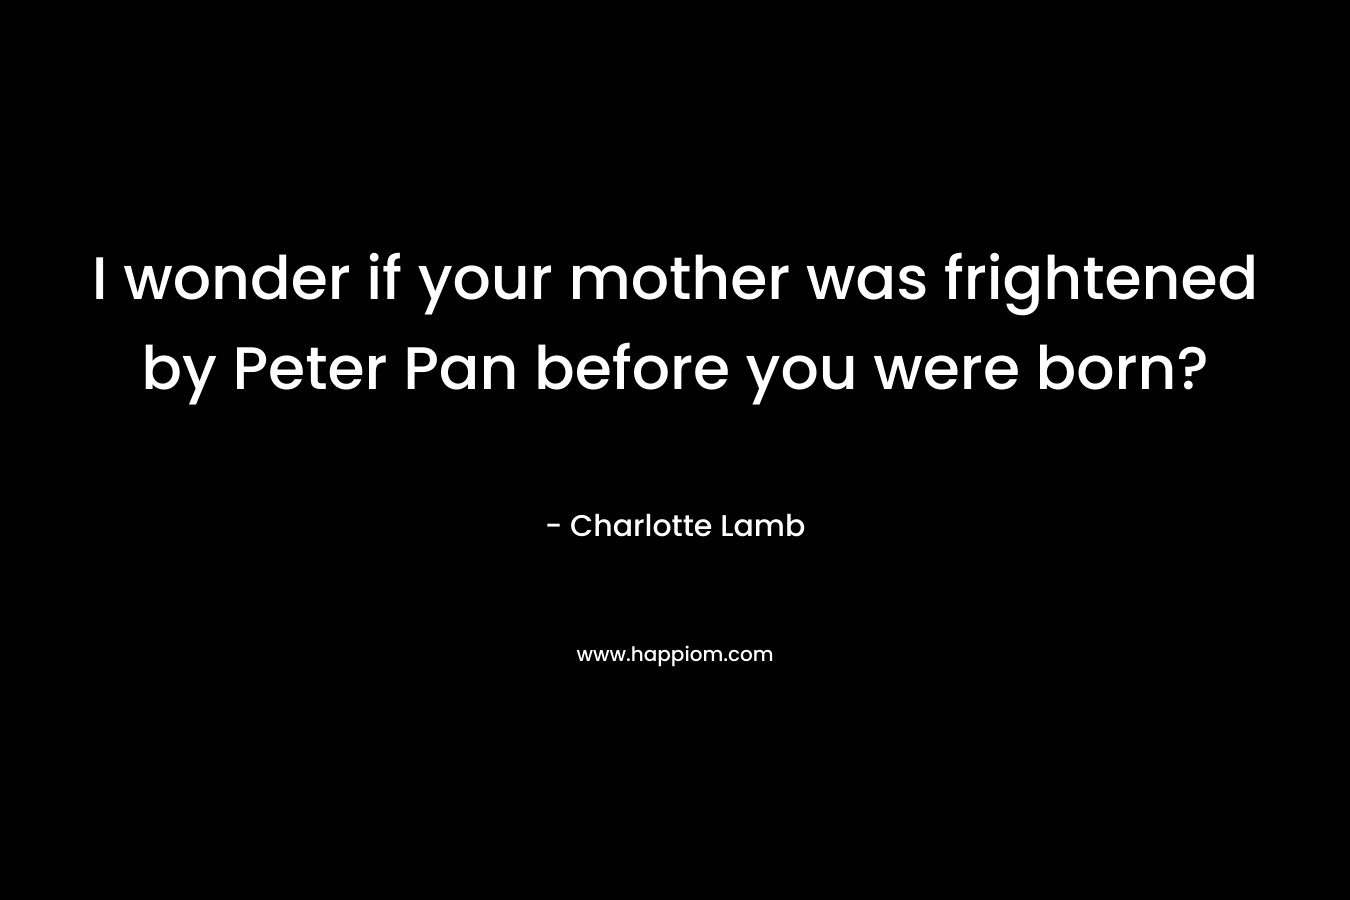 I wonder if your mother was frightened by Peter Pan before you were born?